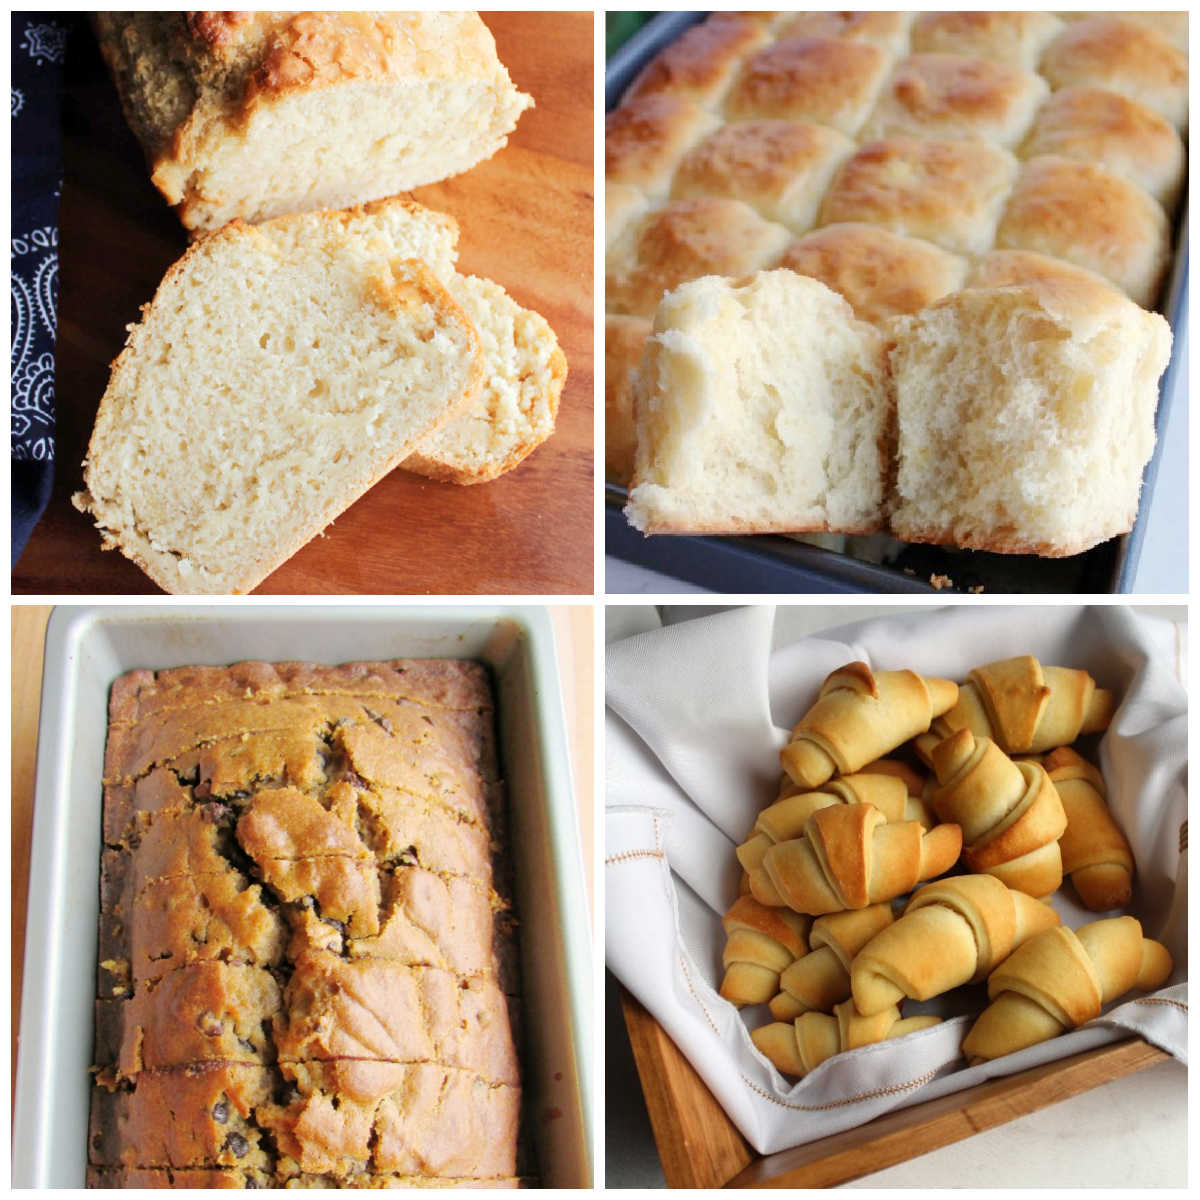 Collage of images including homemade quick breads and yeast rolls.